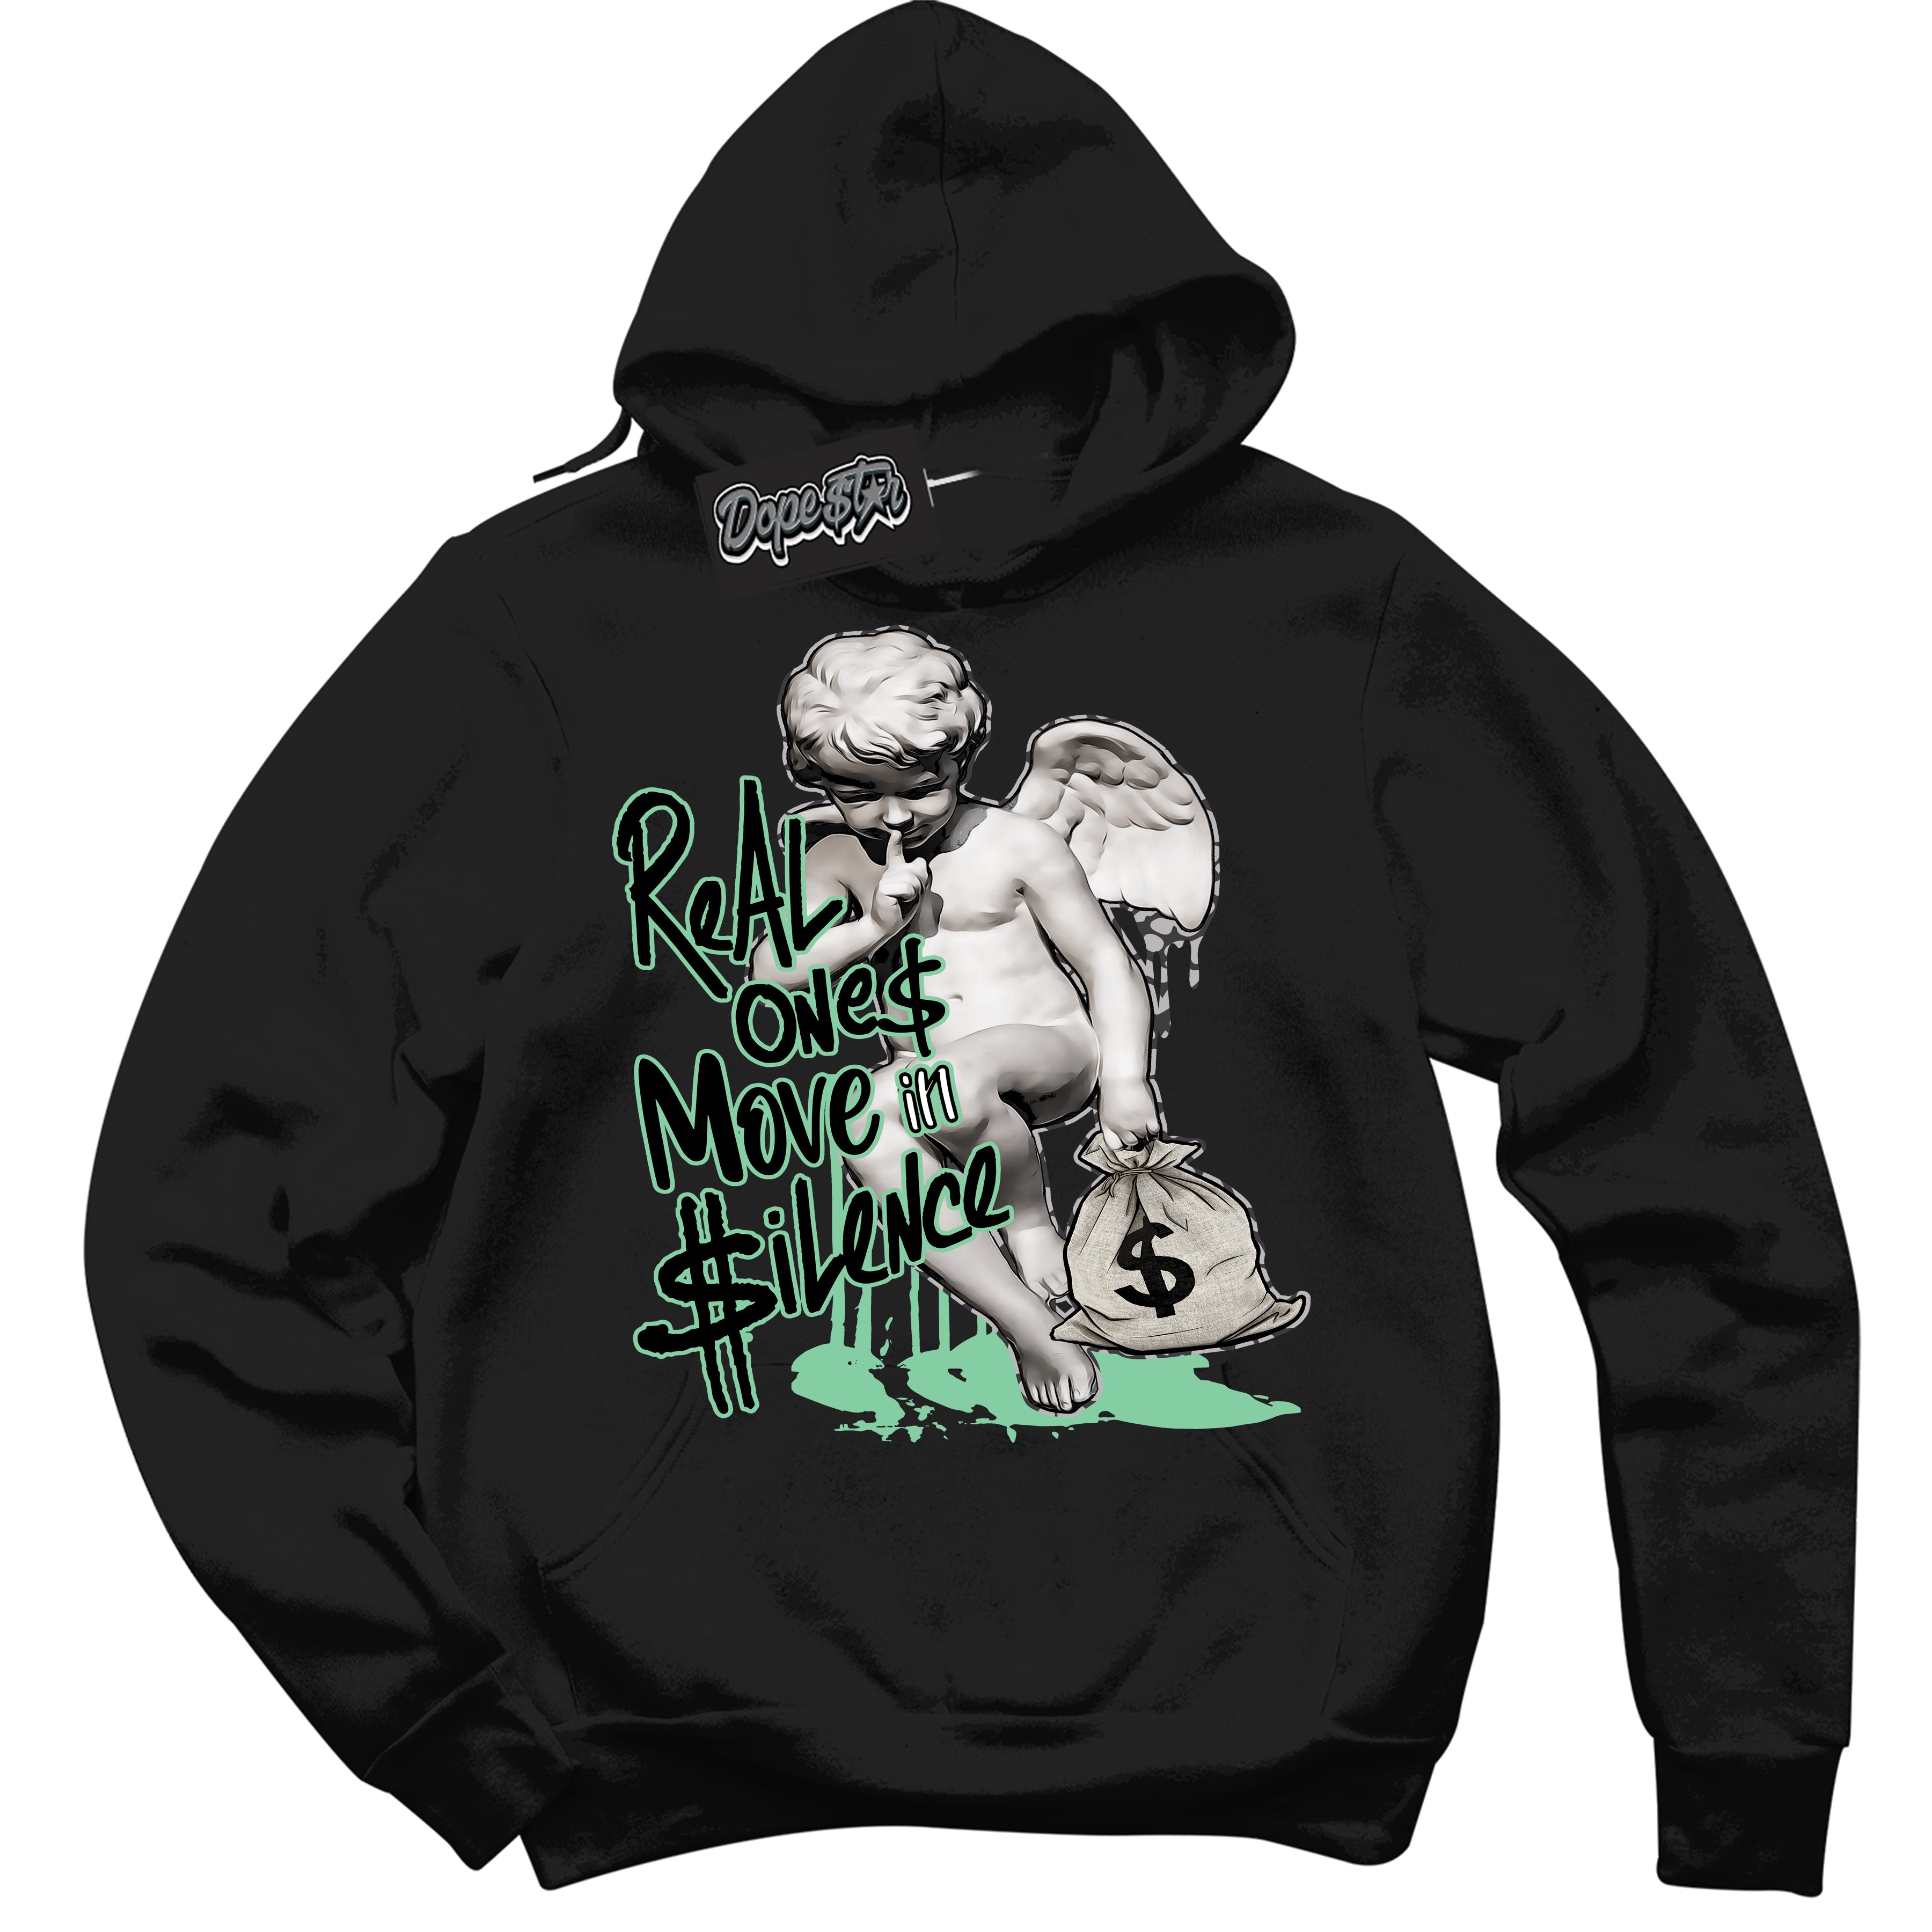 Cool Black Graphic DopeStar Hoodie with “ Real Ones Cherub “ print, that perfectly matches Green Glow 3S sneakers